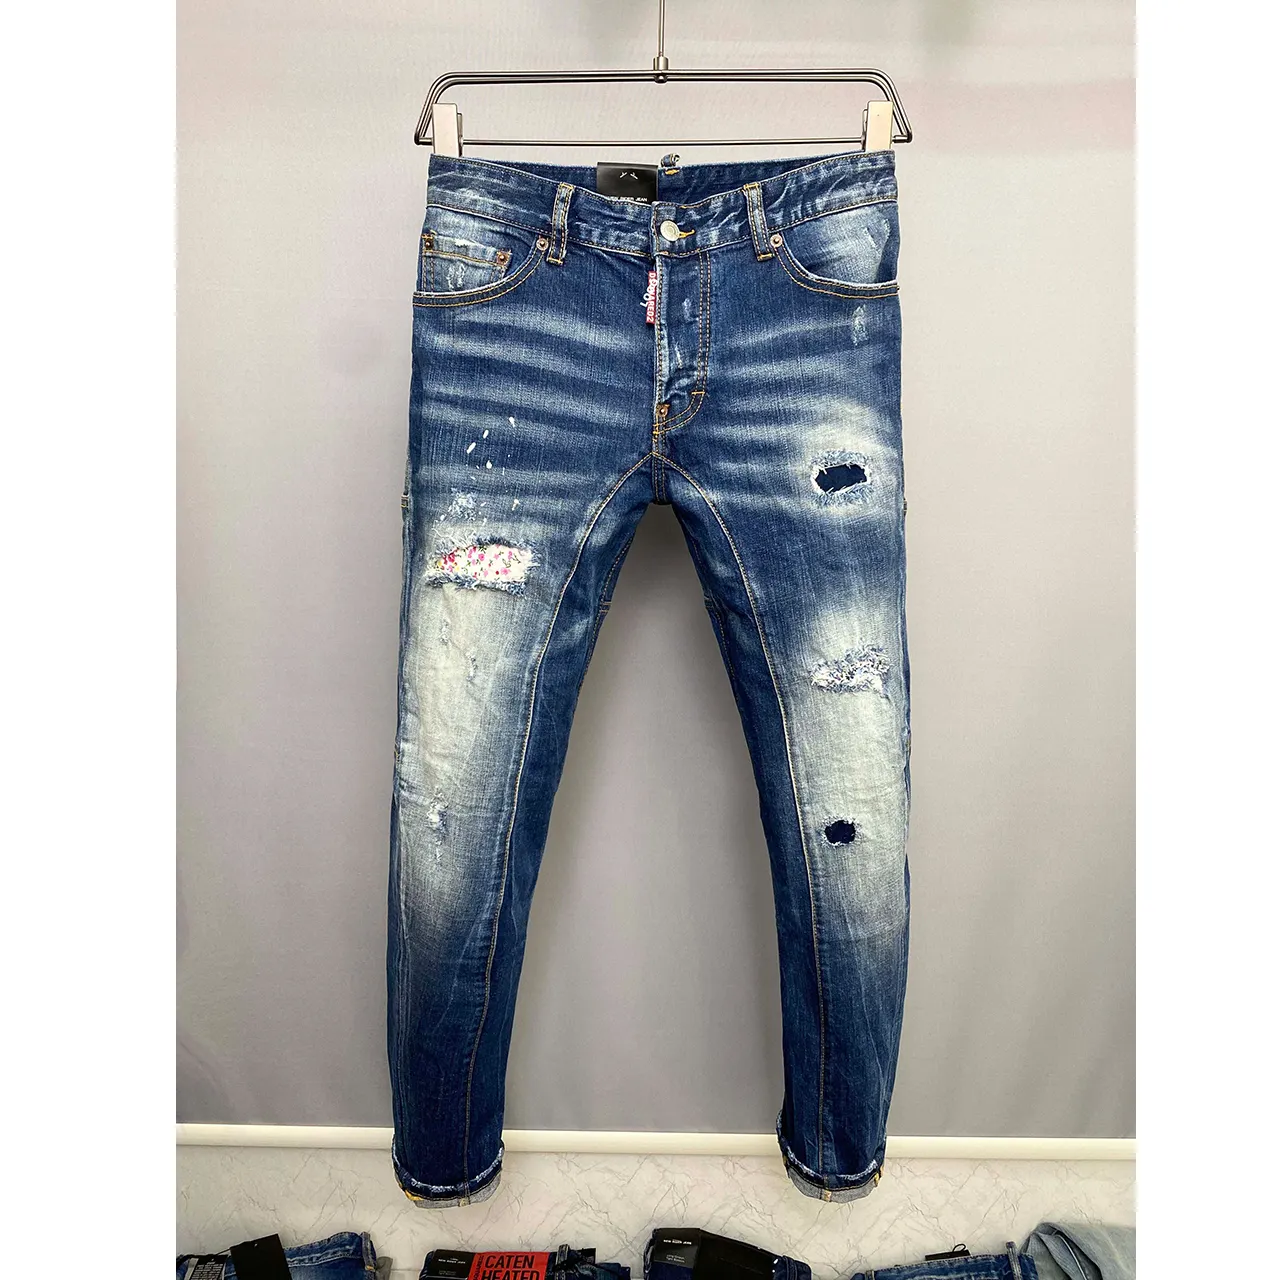 2023 Spring And Summer New D2 Jeans Fashion Men Wash Wear Hole Patch Paint Wash Color Change Small Feet Blue Jeans Men